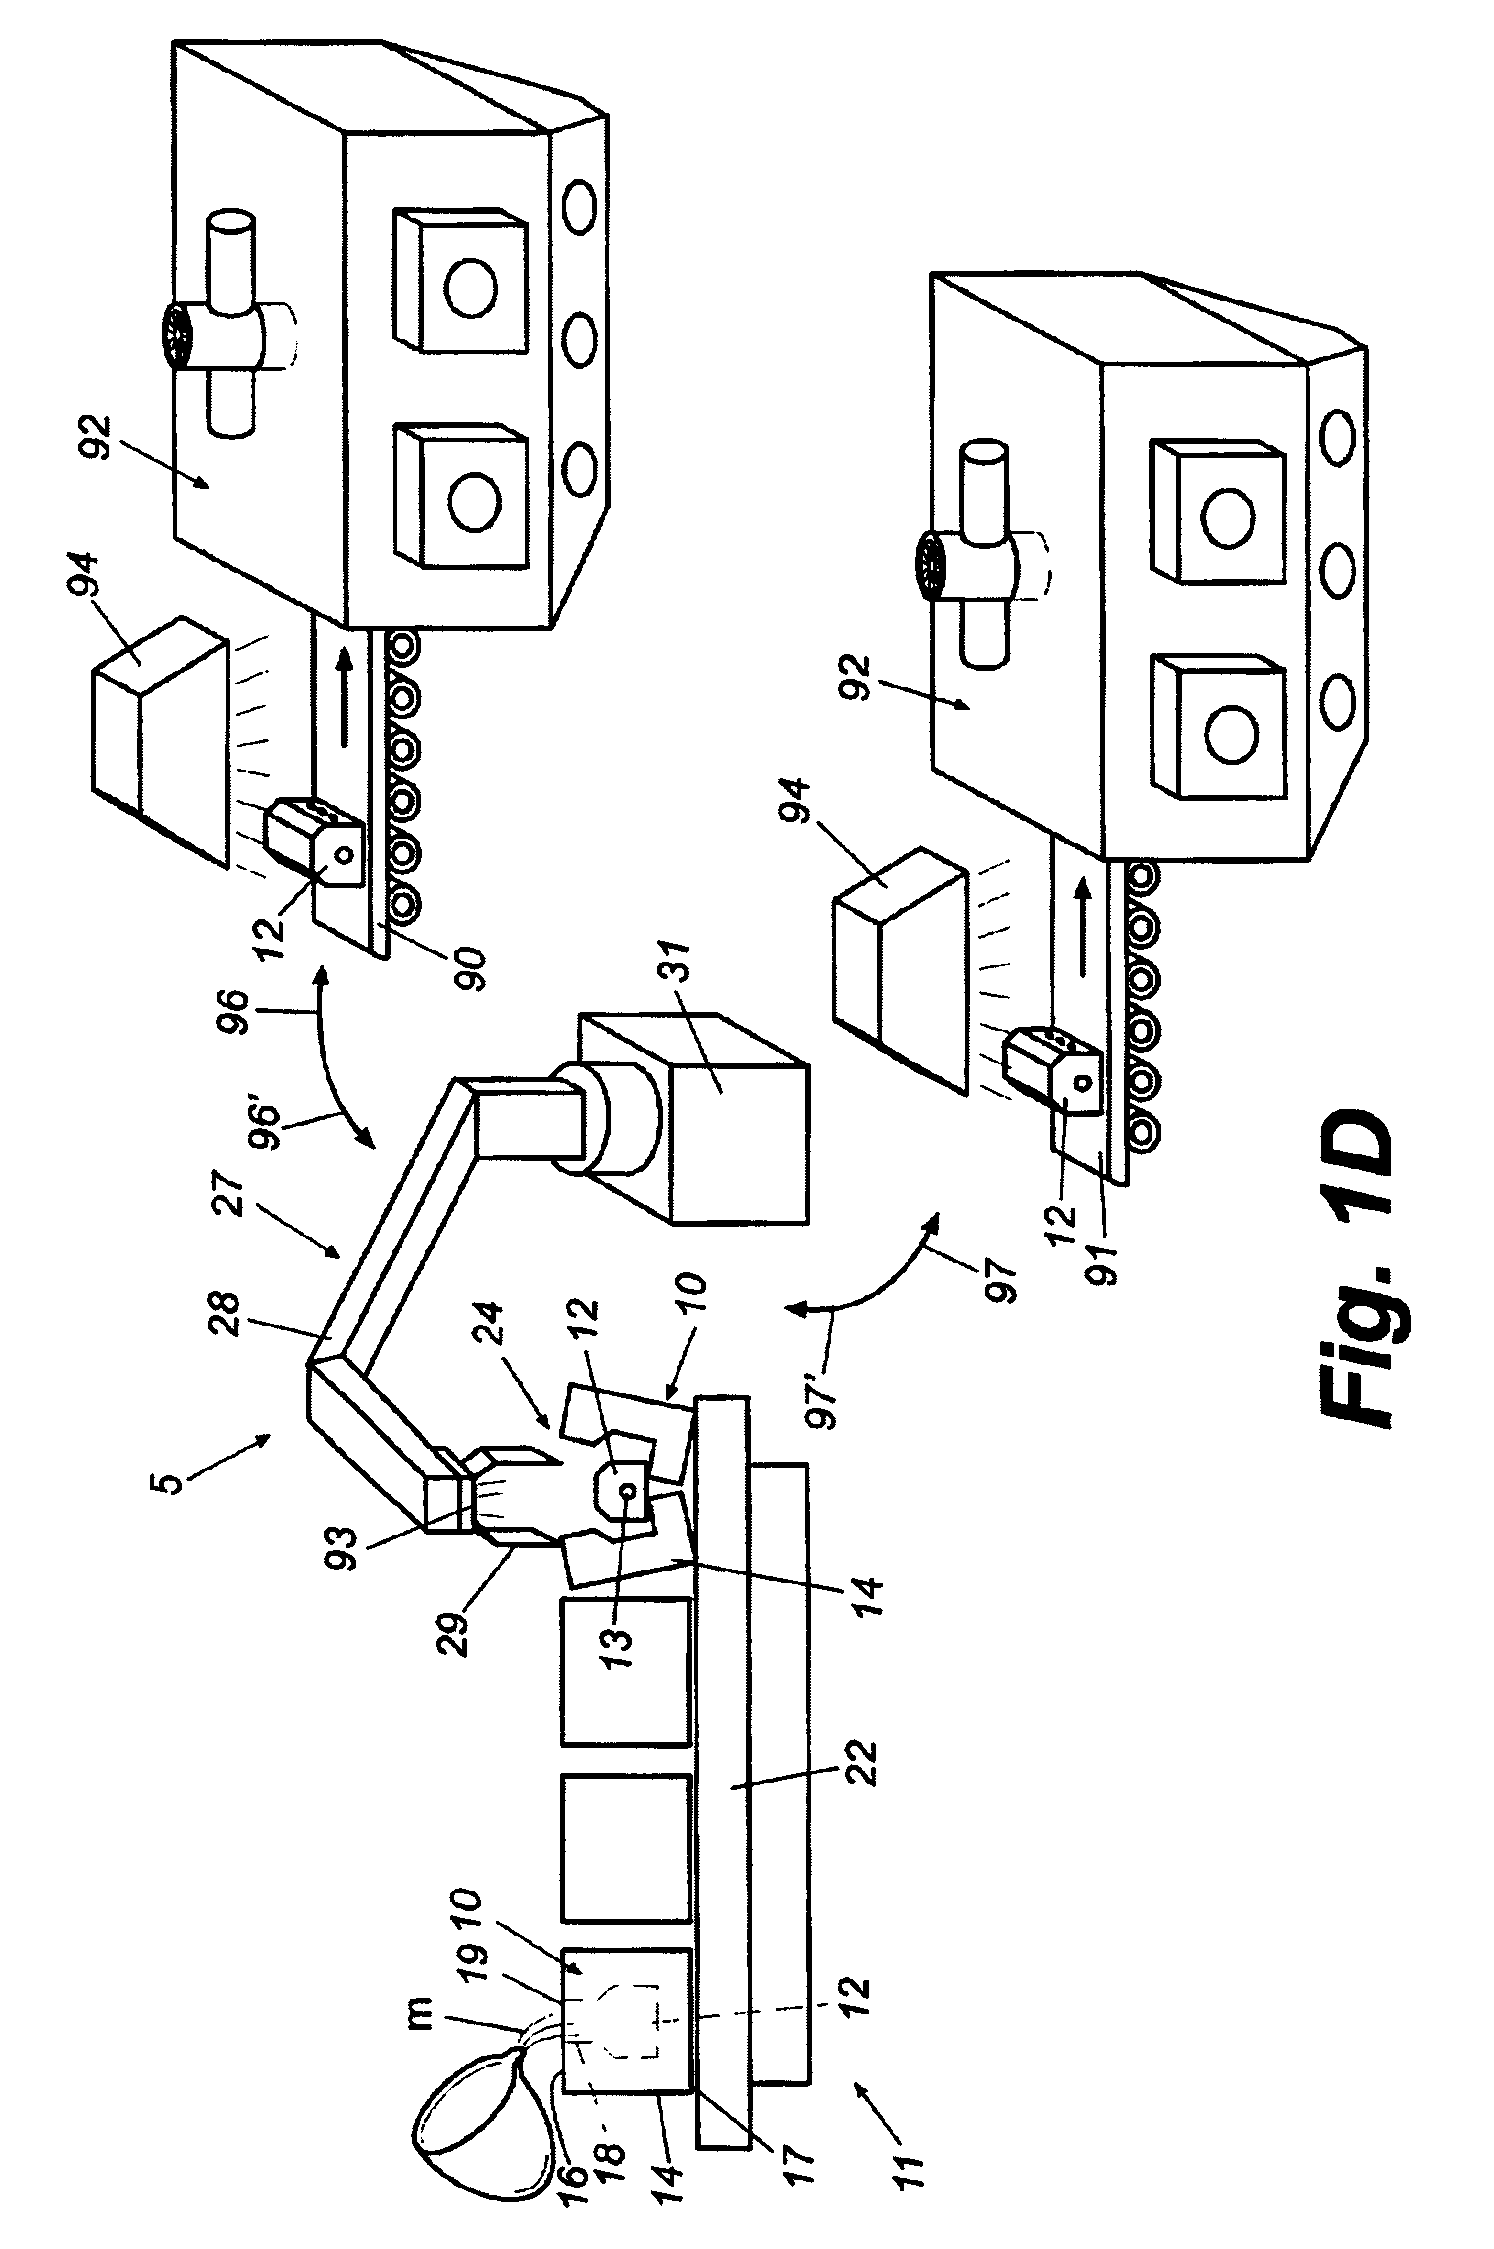 Integrated metal processing facility